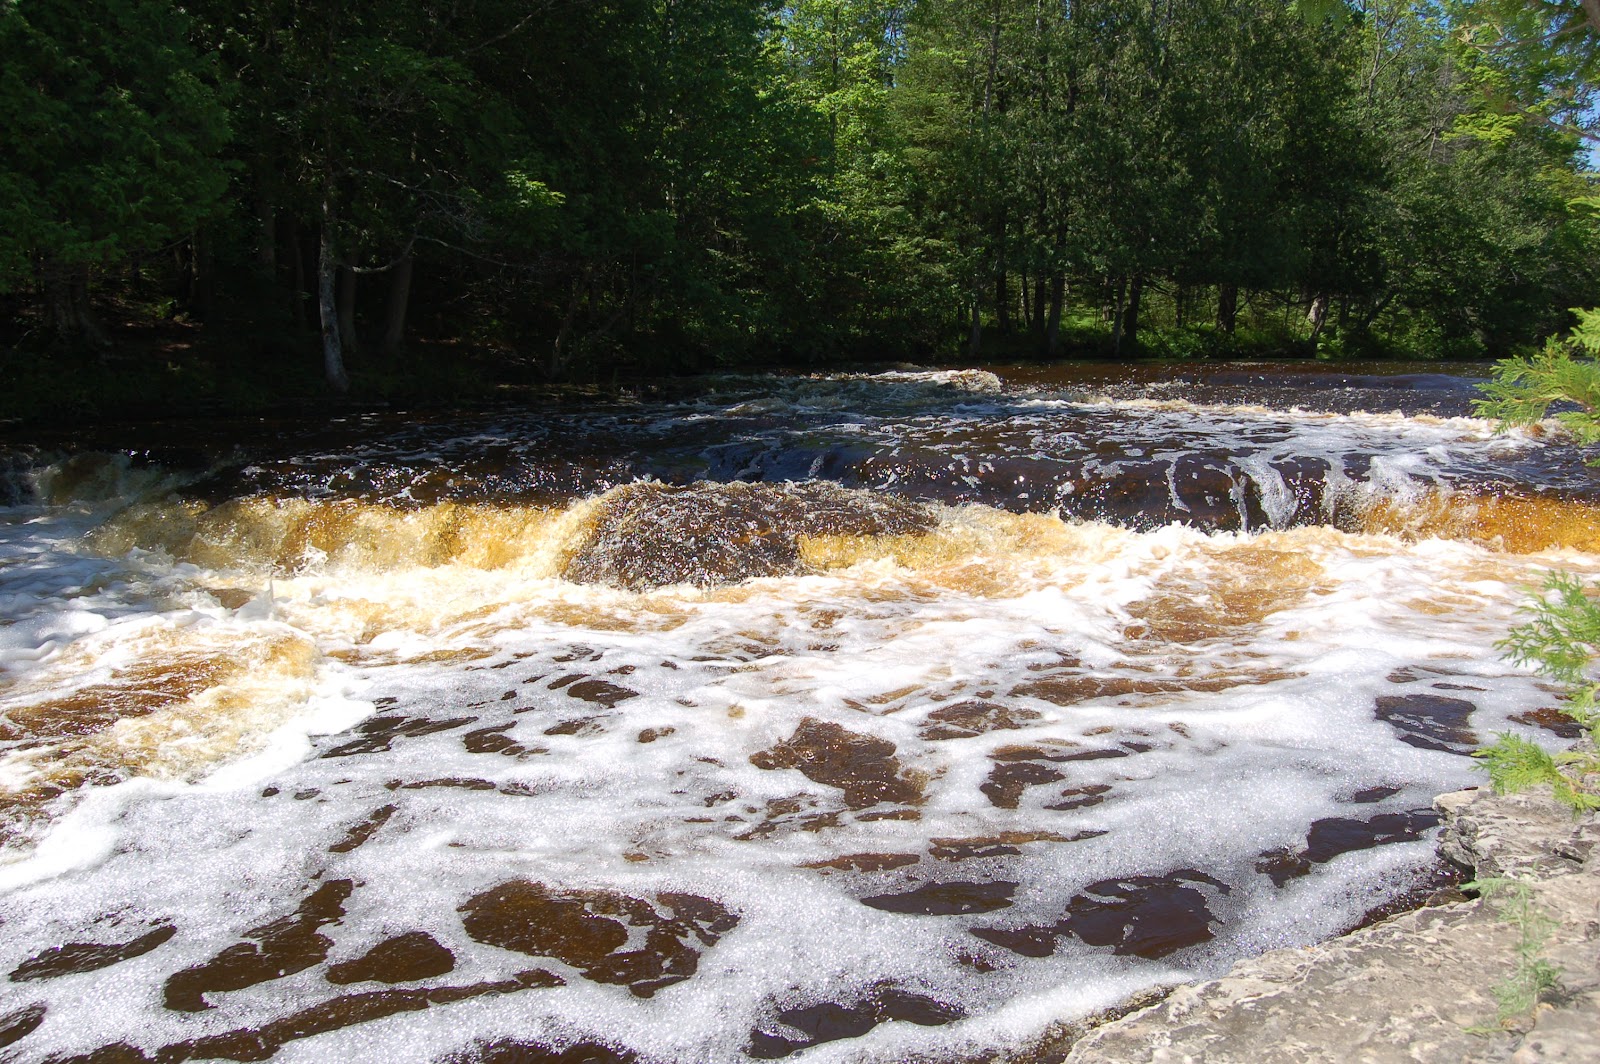 Rapid River Falls and Park - Delta County - Travel the Mitten